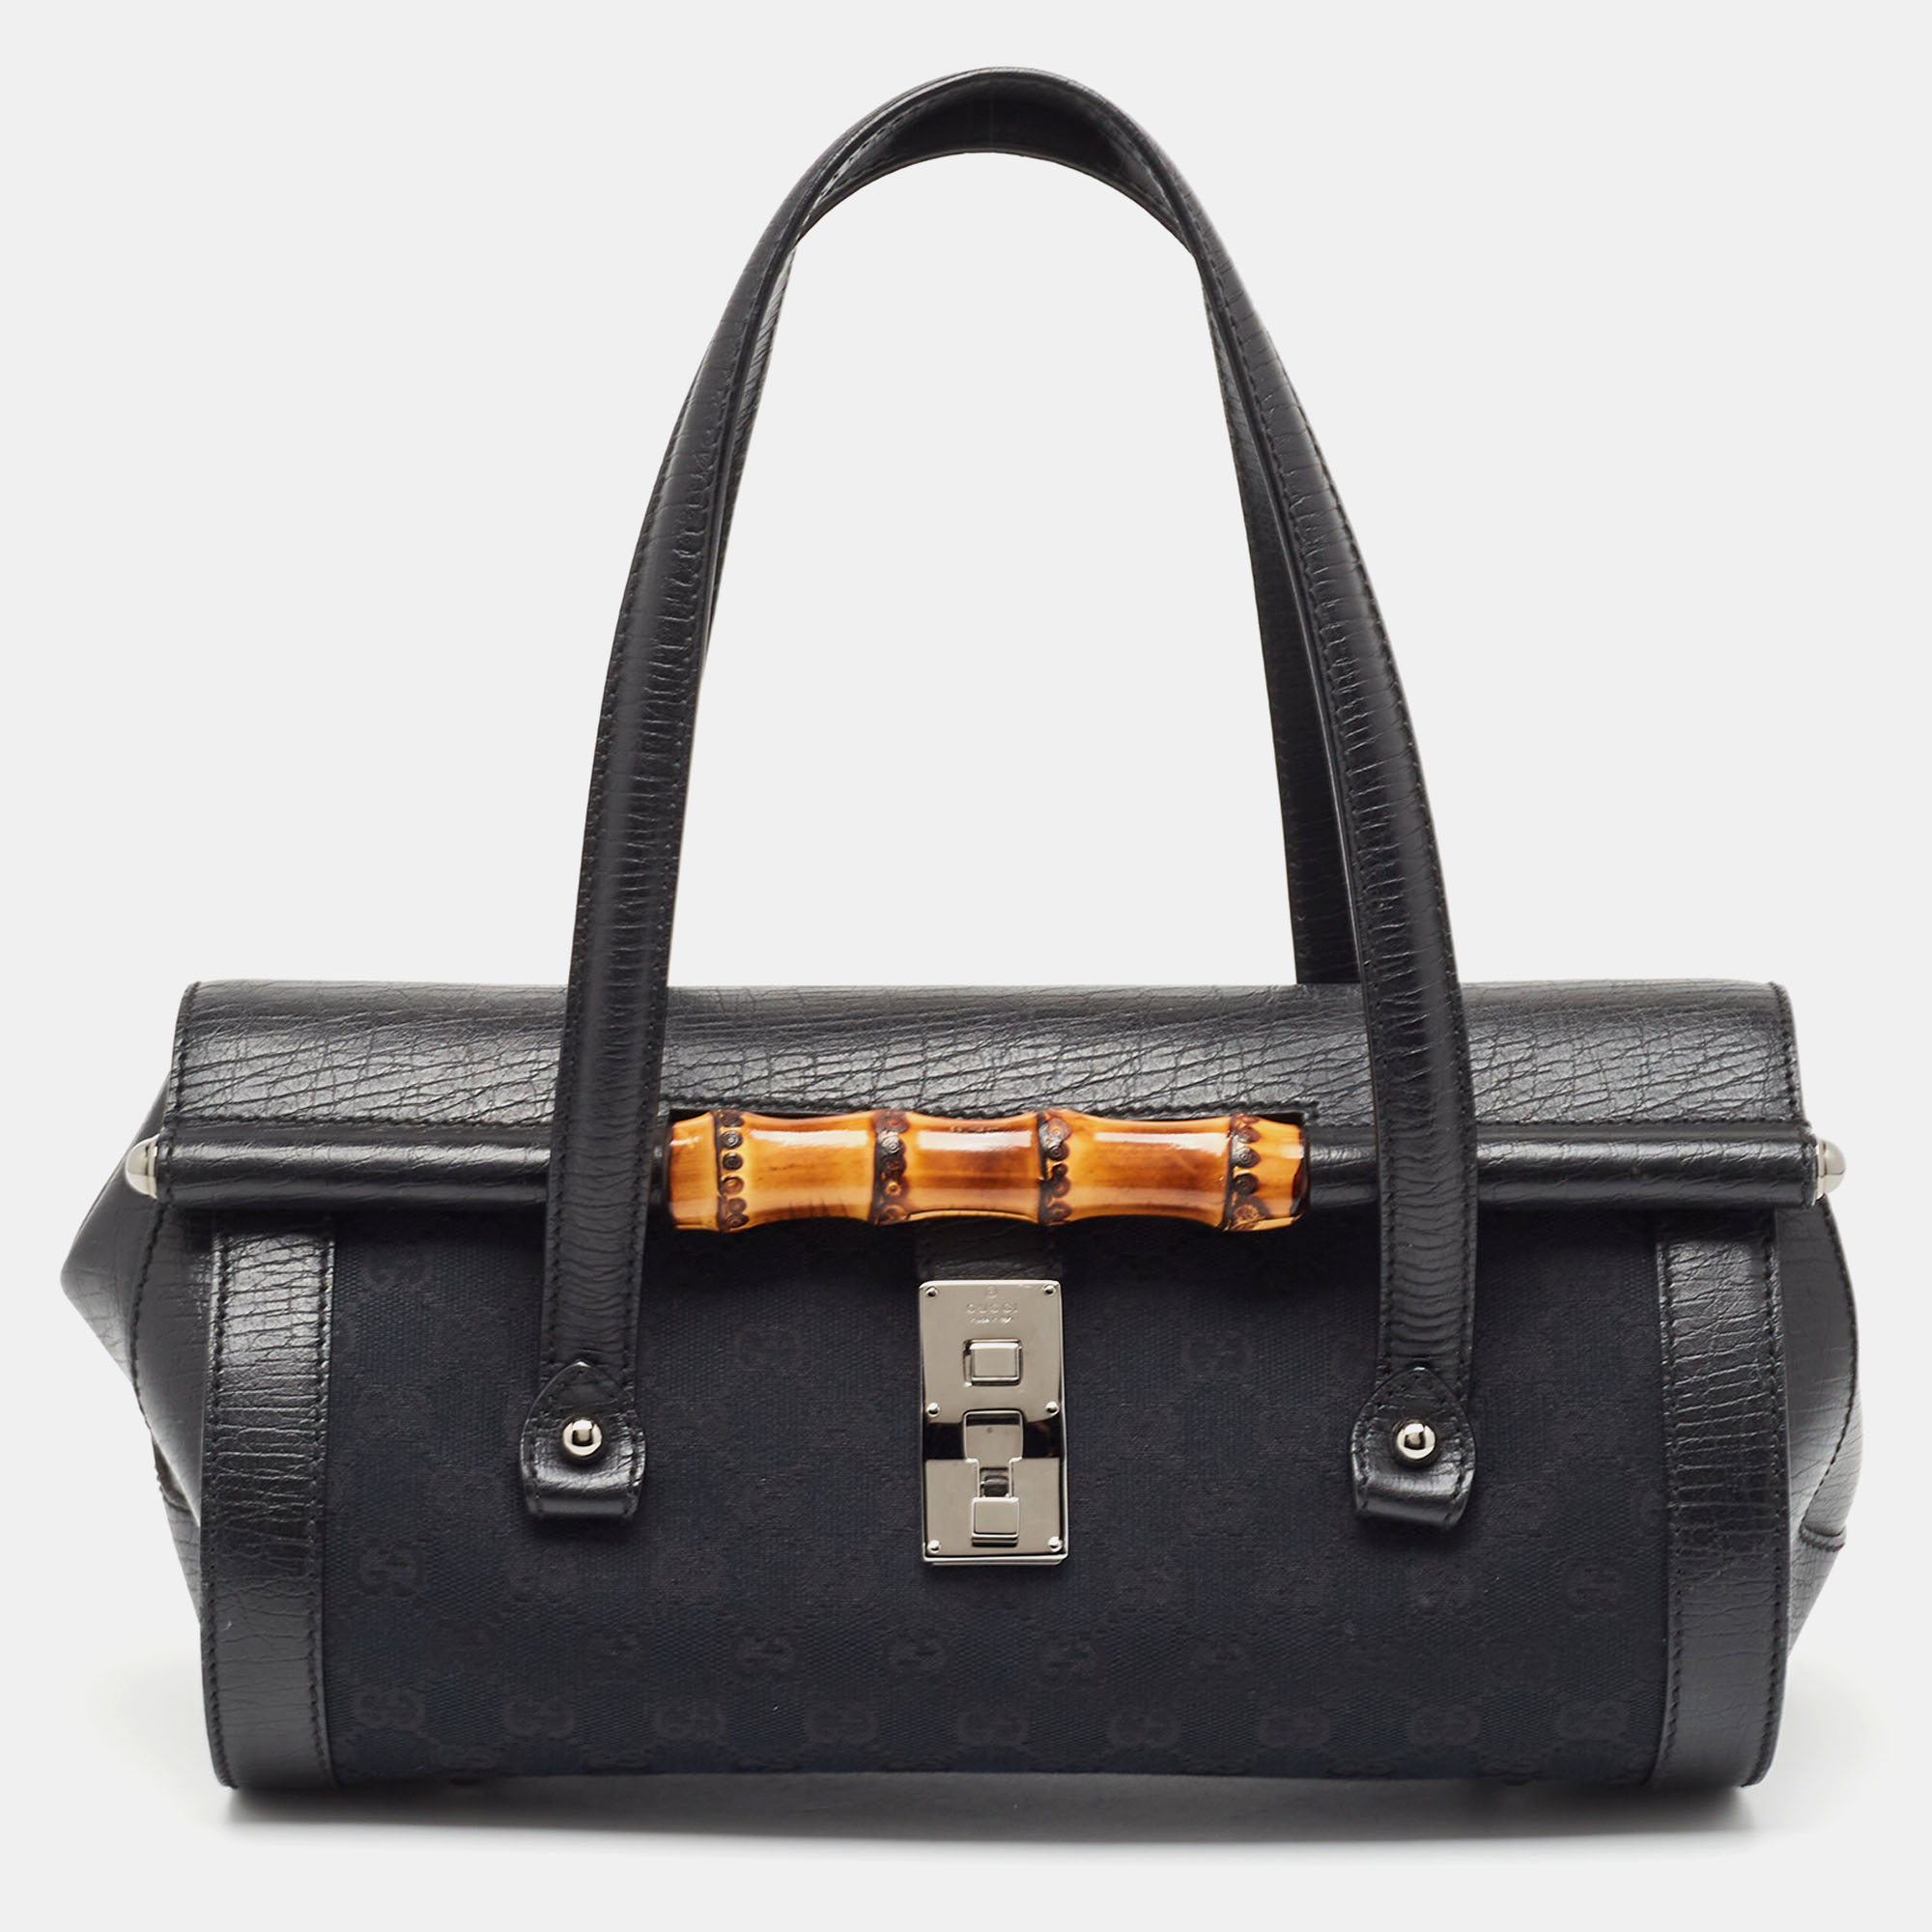 Stylish and easy to carry this designer satchel will be a fine choice for work or after. Lined well this bag for women can easily fit all your essentials. It can be held in your arm or hand.